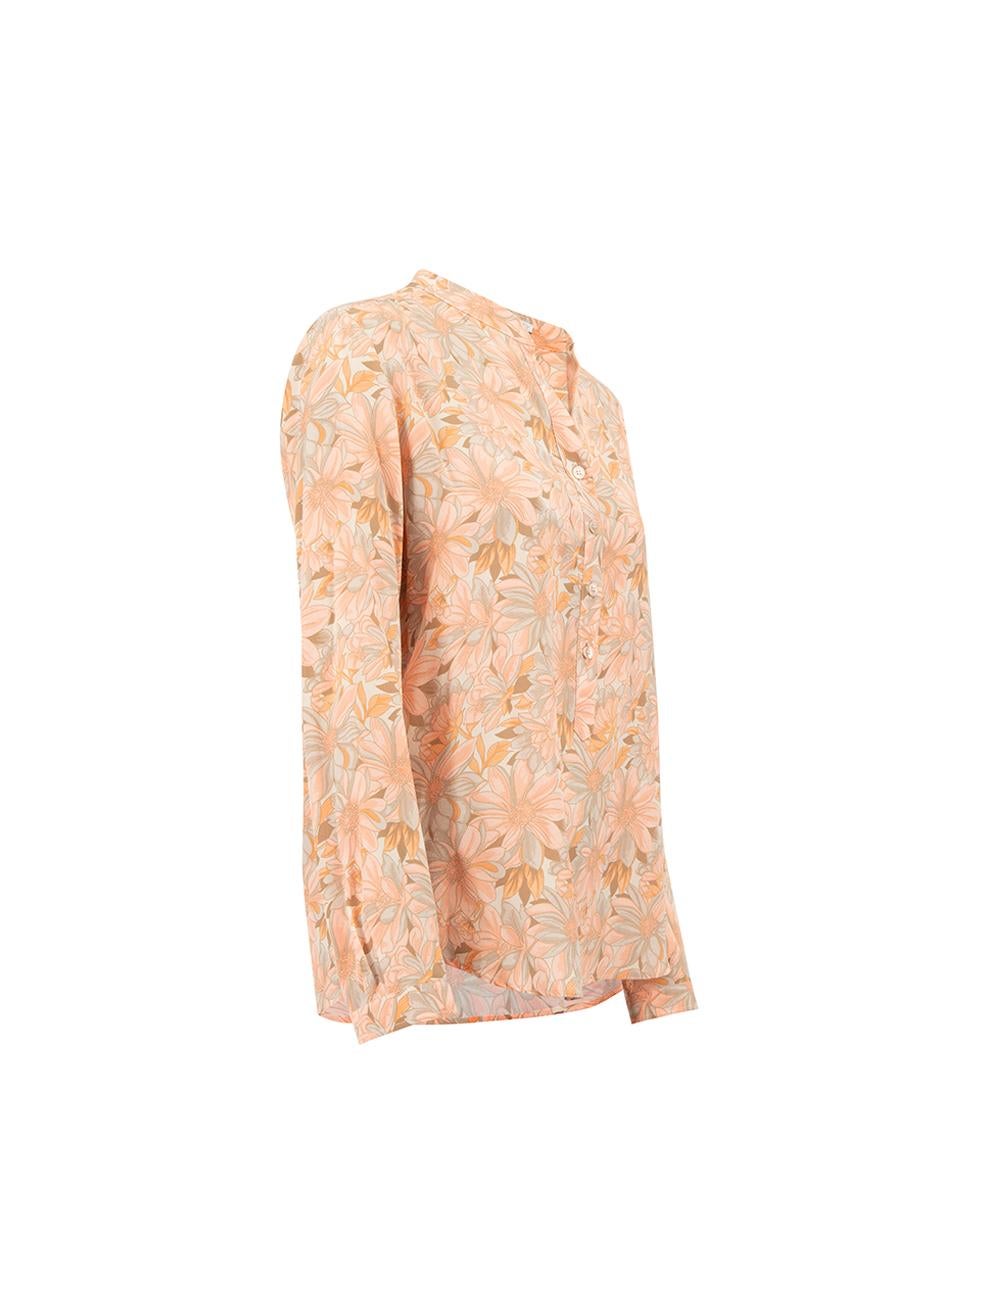 CONDITION is Never Worn. No visible wear to blouse is evident on this used Stella McCartney designer resale item. Details Pink Silk Long sleeve blouse Floral pattern Button up closure Made in Hungary Composition 100% Silk Care instructions: